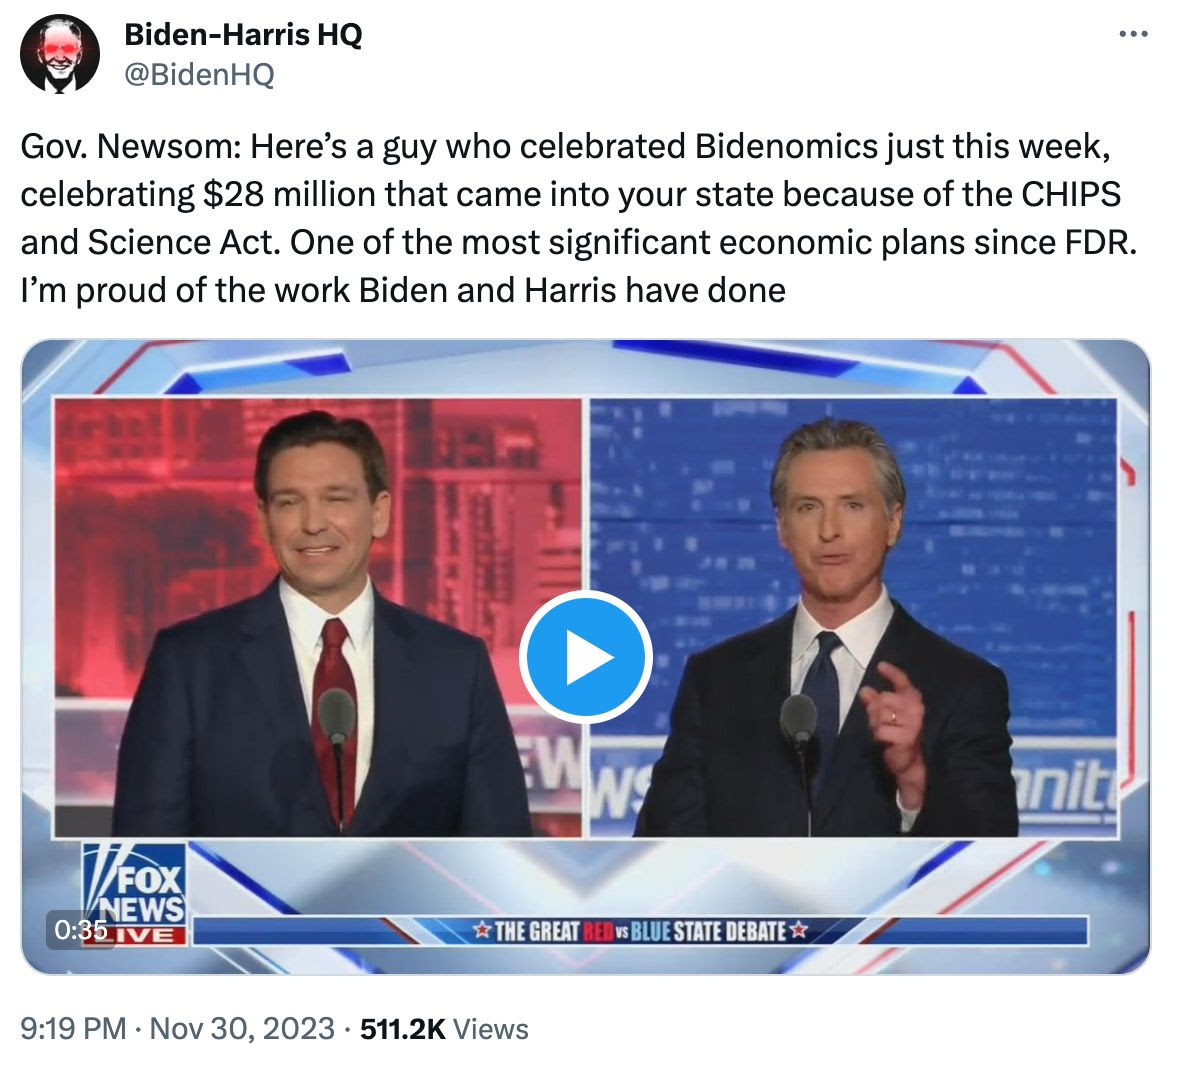 'Gov. Newsom: Here’s a guy who celebrated Bidenomics just this week, celebrating $28 million that came into your state because of the CHIPS and Science Act. One of the most significant economic plans since FDR. I’m proud of the work Biden and Harris have done'